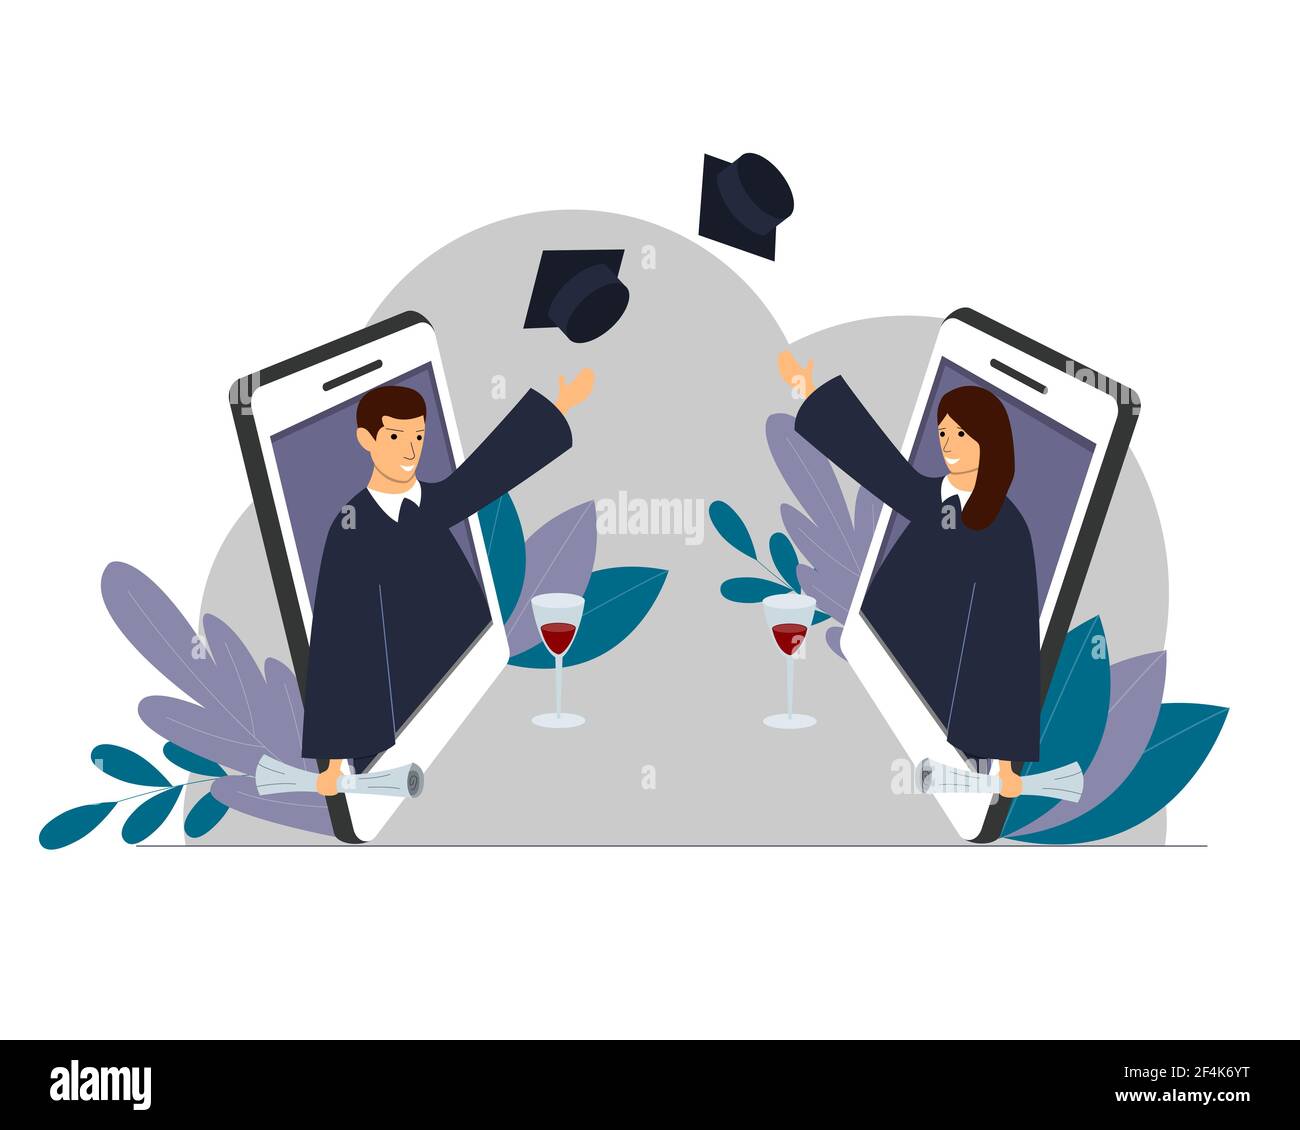 Graduation, square cap of the graduate, mantle. the concept of a graduation on insulation. A mobile phone, a man and a woman glasses of wine. vector Stock Vector